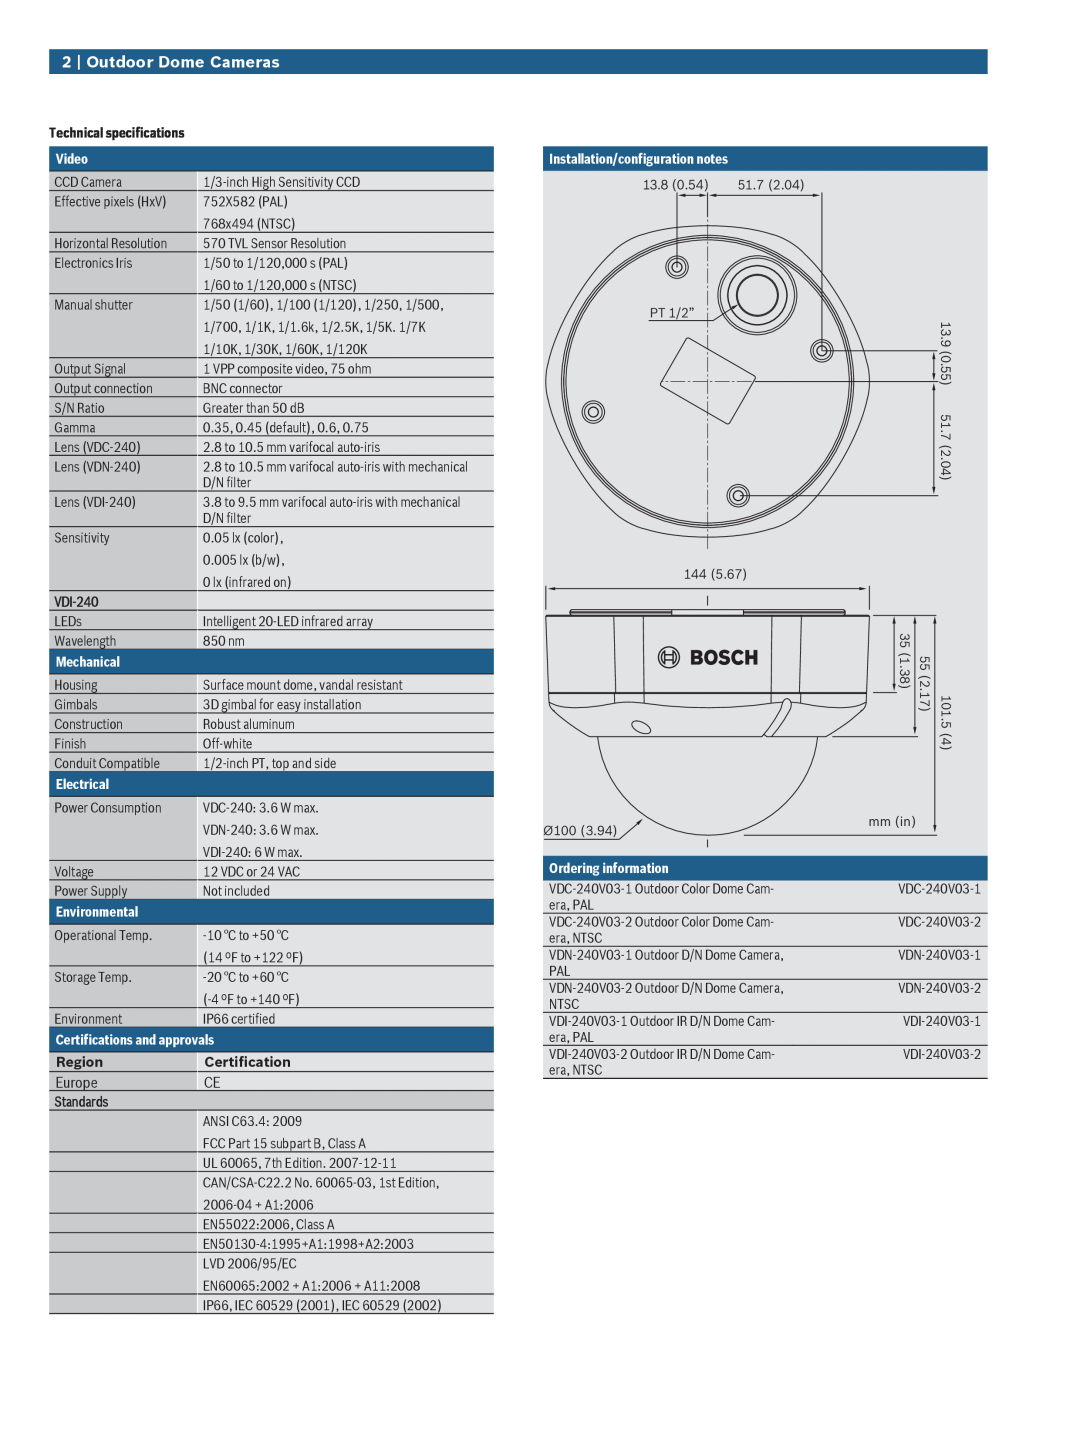 Bosch Appliances VDx-240 Outdoor Dome Cameras, Europe, Technical specifications, Video, VDI-240, Mechanical, Electrical 